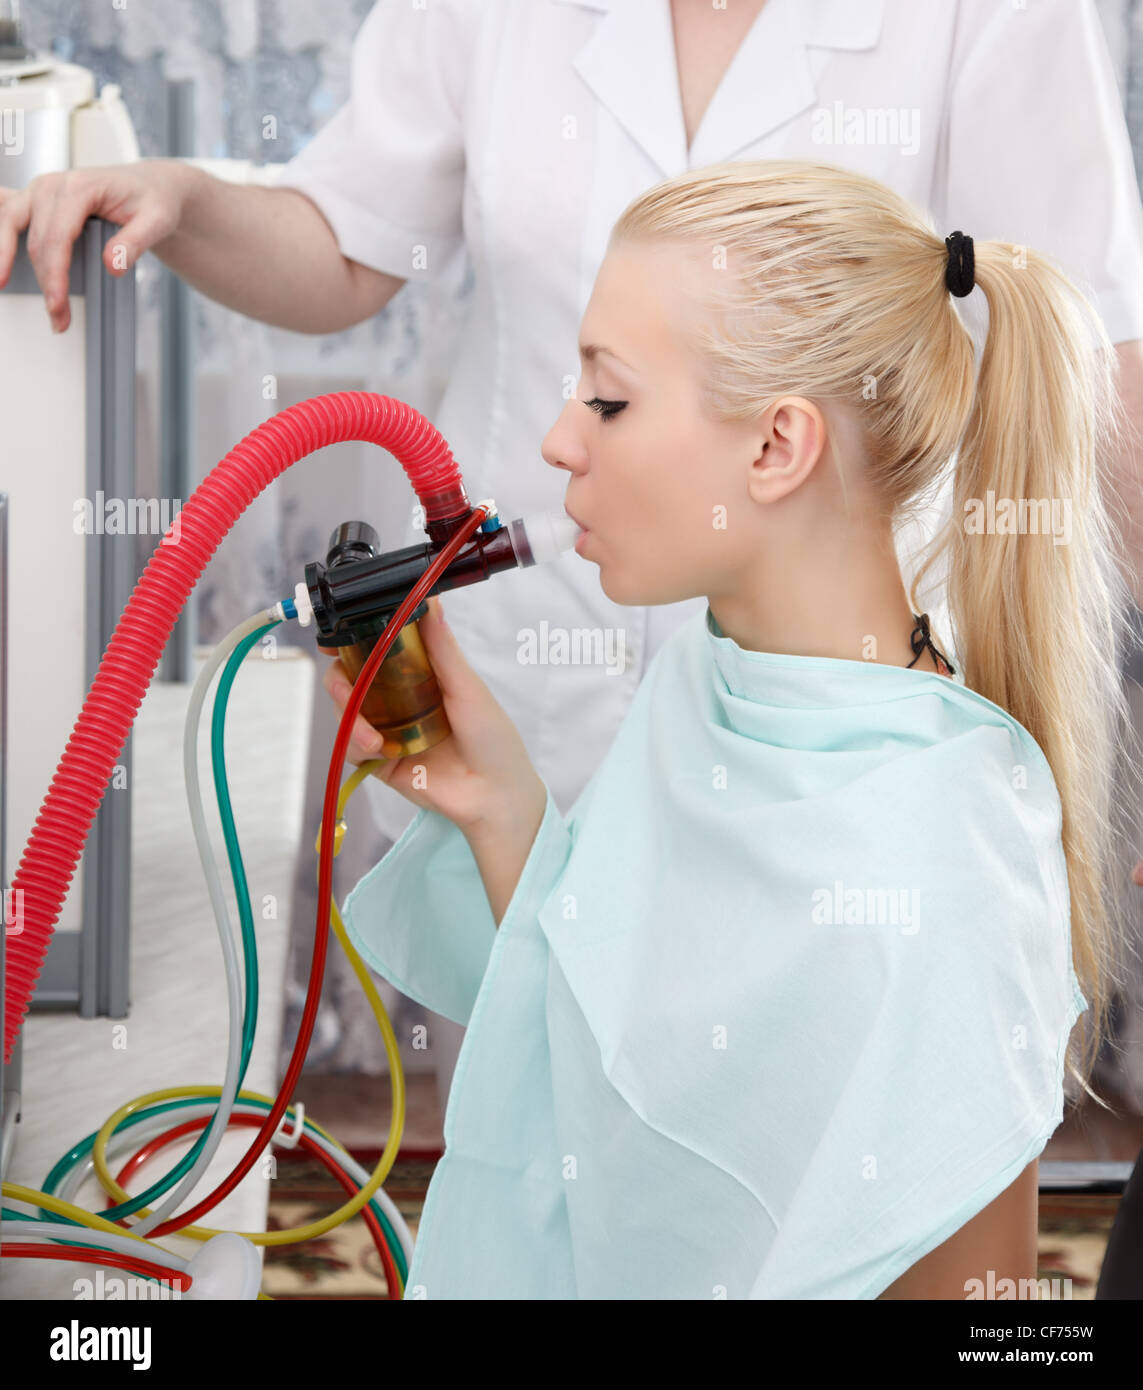 Young woman on the inhalation procedure at the resort. Stock Photo